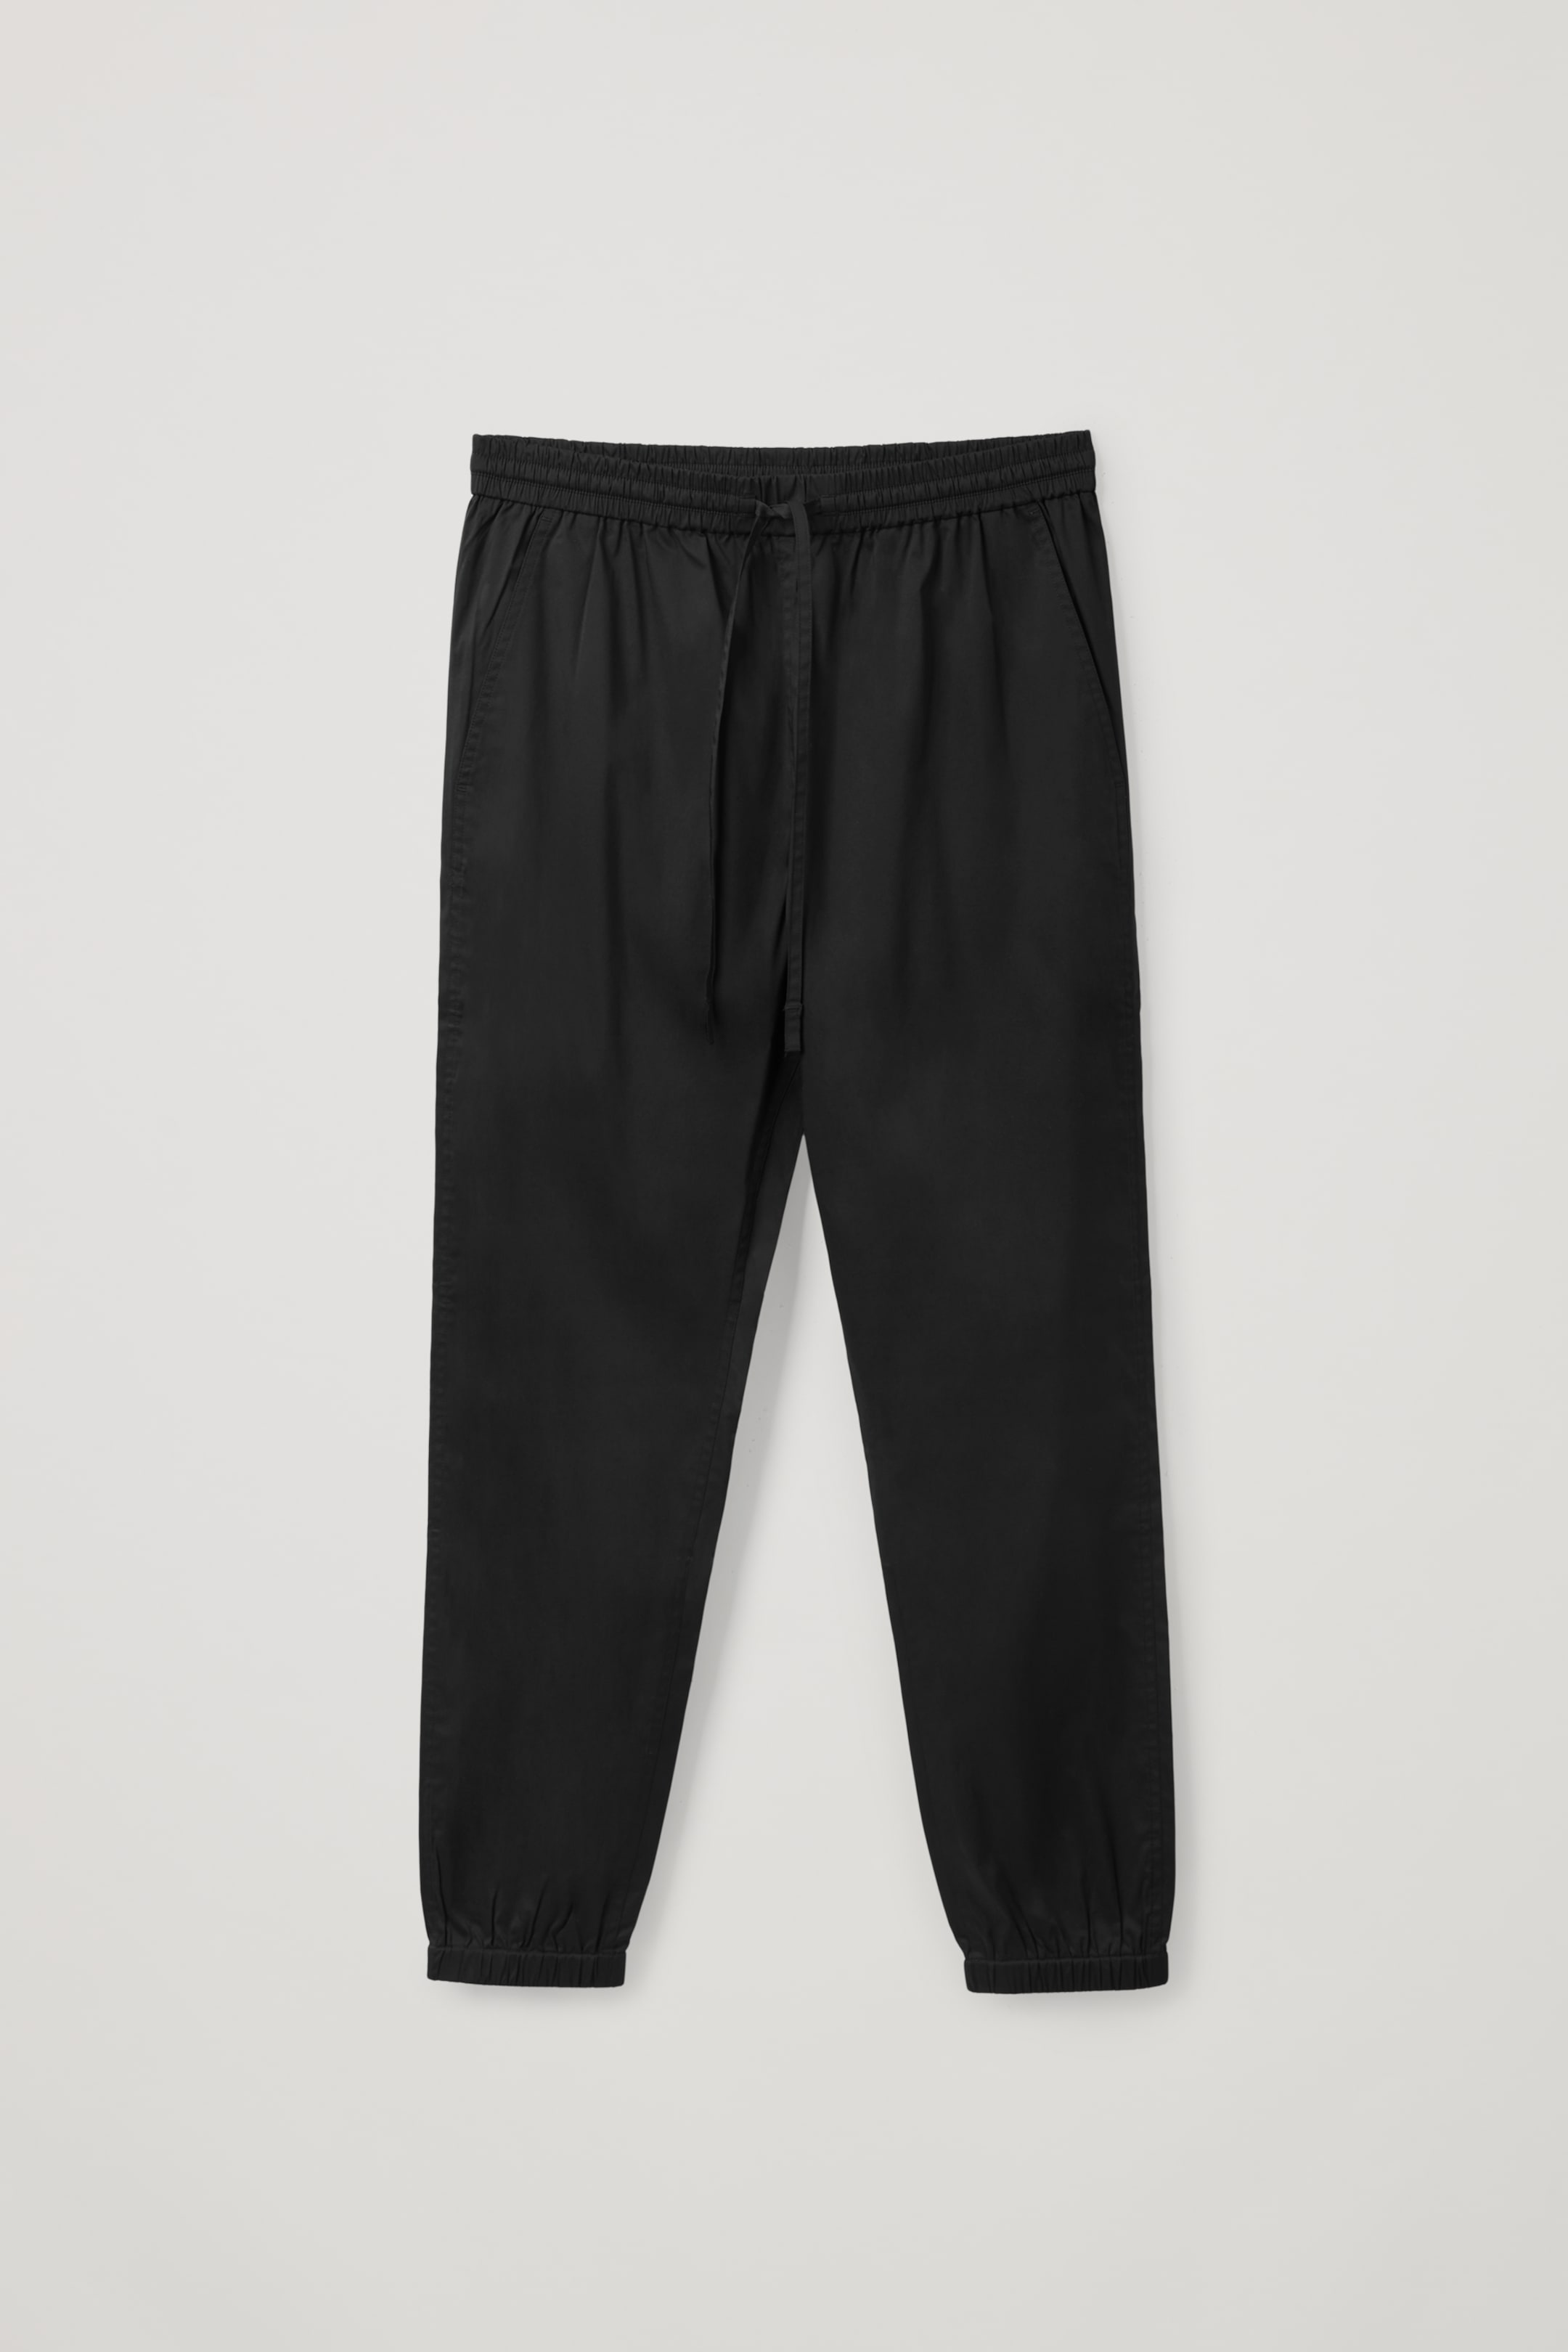 Front image of cos SLIM-FIT DRAWSTRING CUFFED PANTS in Black